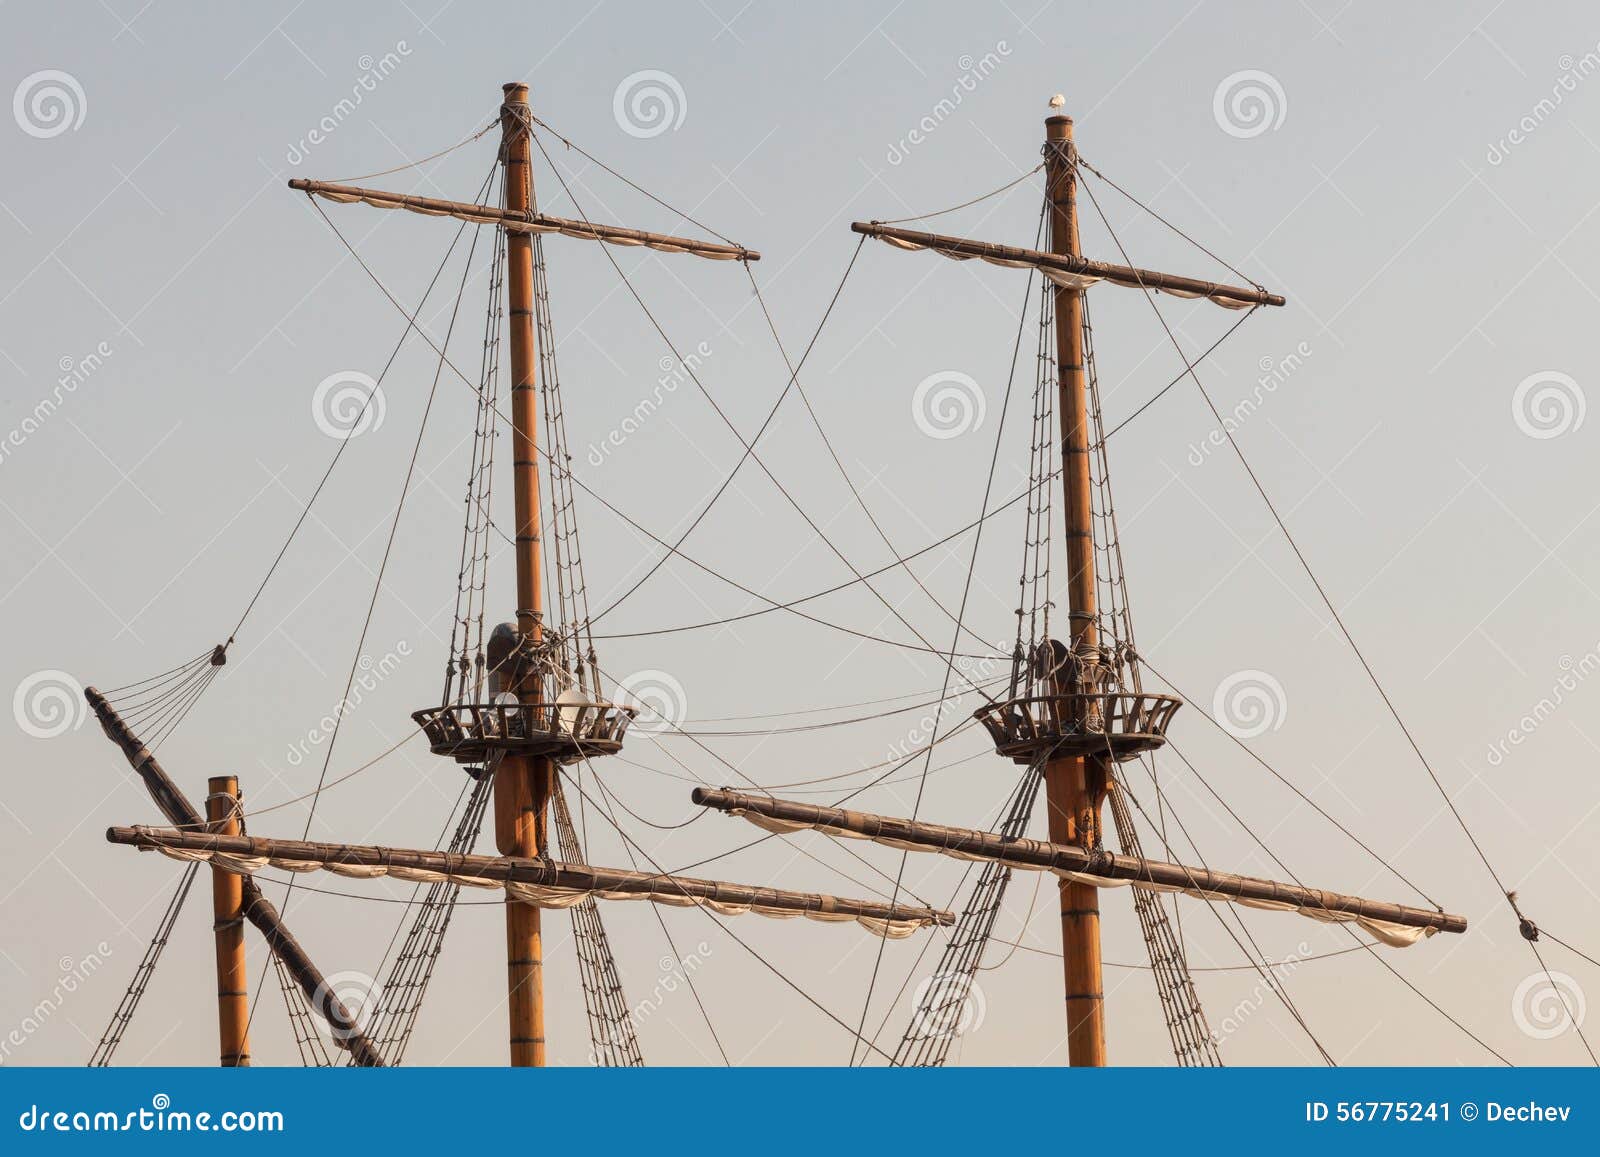 Masts Of A Pirate Ship Stock Photo - Image: 56775241